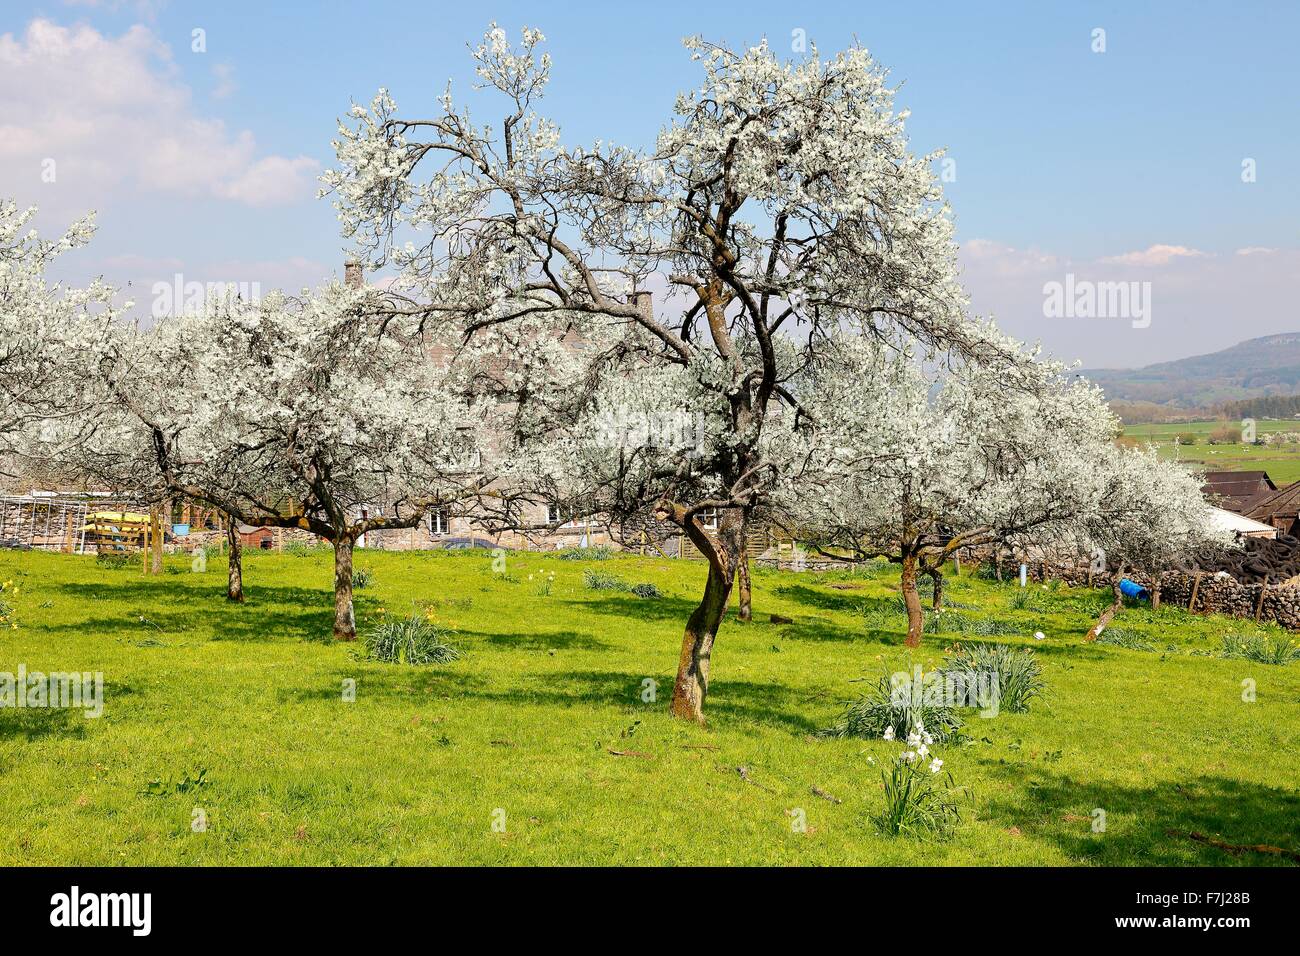 Lyth Valley. Damson tree orchard in blossom. Flodder Hall Farm, The Howe, Lake District National Park, Cumbria, England, UK. Stock Photo